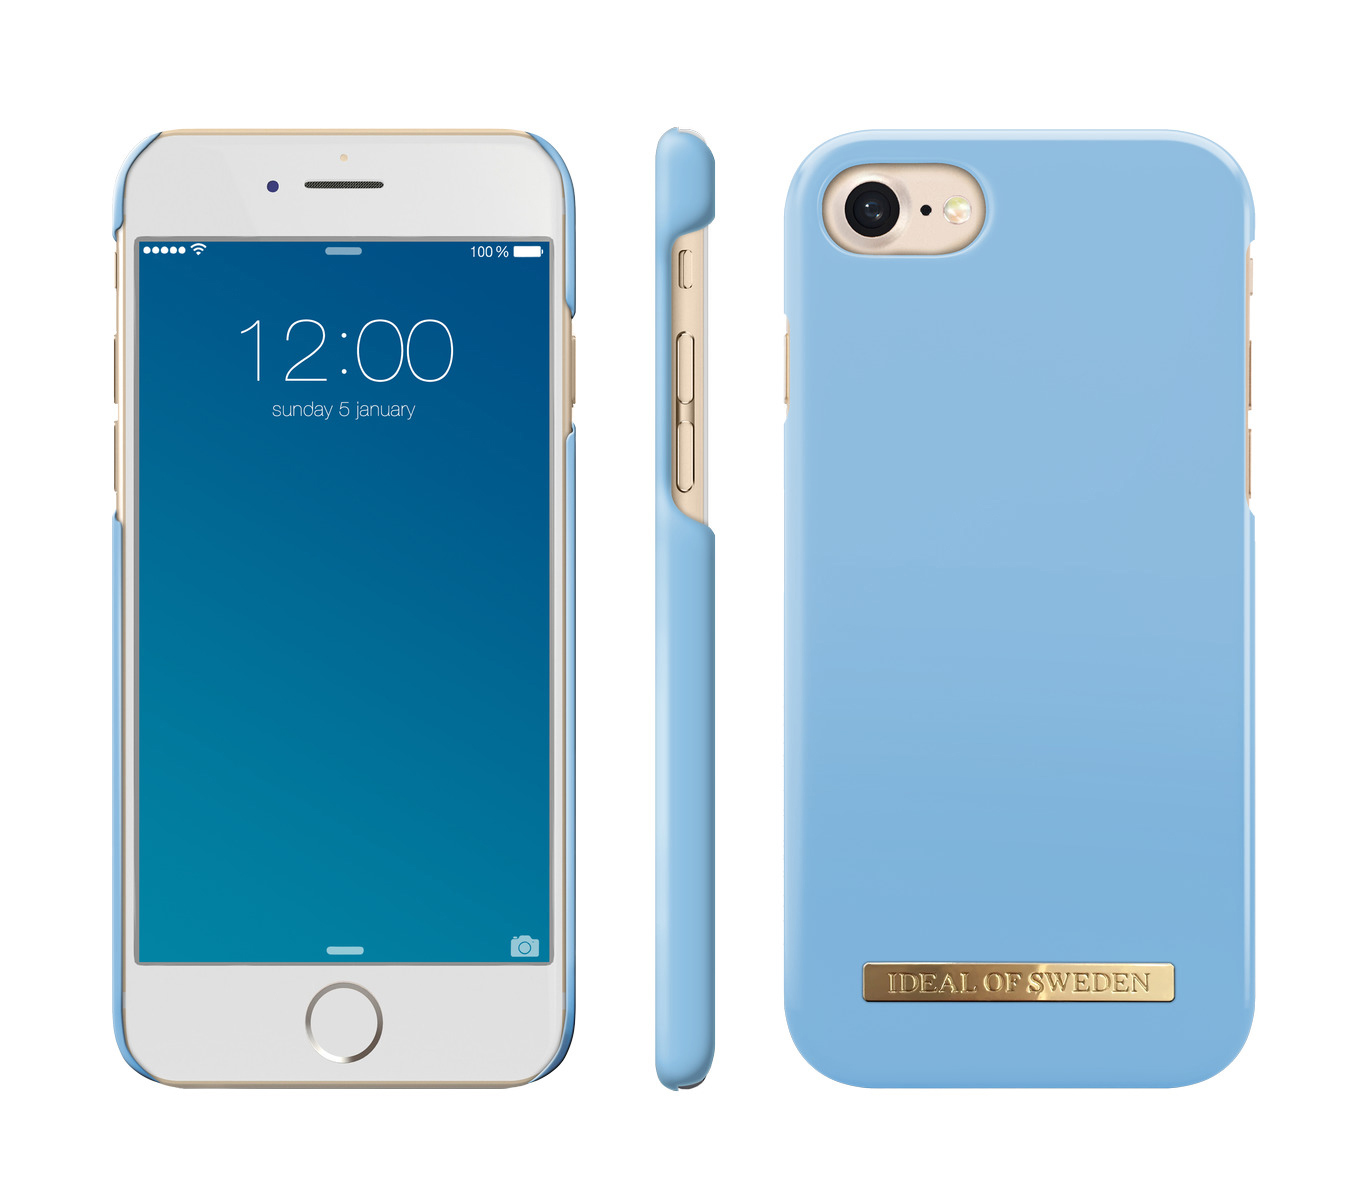 OF Apple, Fashion, iPhone iPhone Blue Backcover, 7, 8, IDEAL iPhone Airy 6, SWEDEN